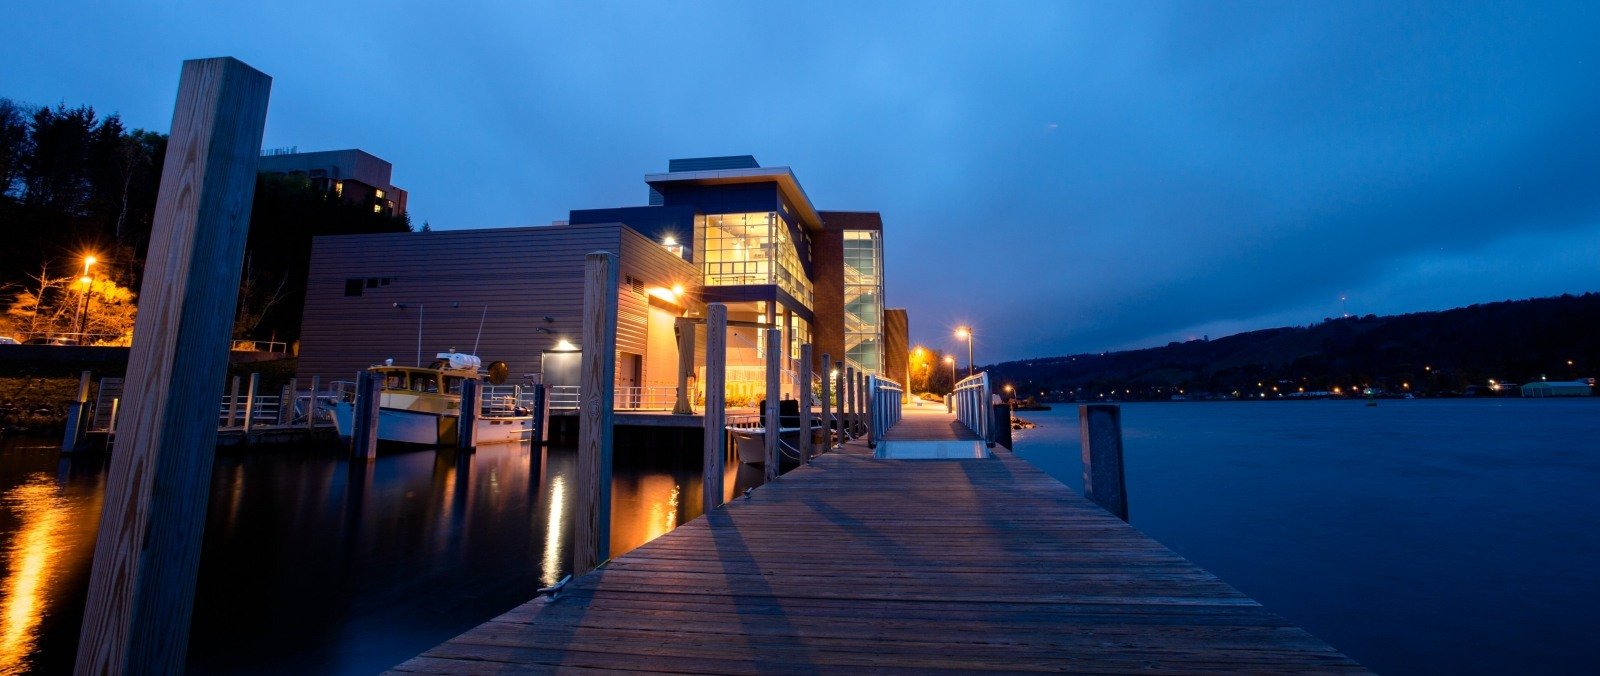 Great Lakes Research Center building and dock.